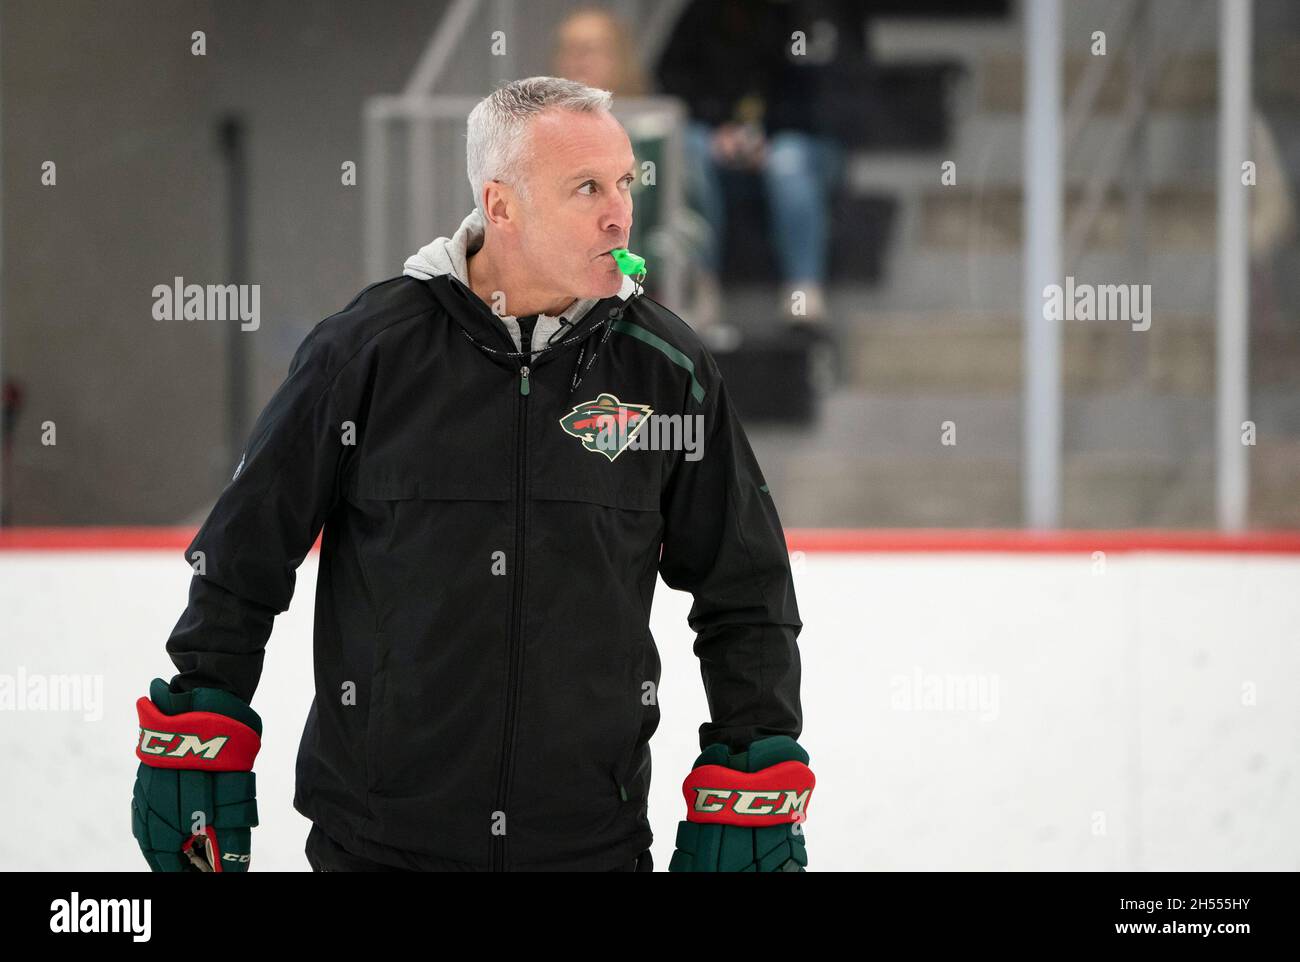 Minnesota Wild head coach Dean Evason leads practice at Tria Rink in St. Paul, Minnesota, in February 2020. Evason guided the Wild to a 5-4 shootout win on the road against the Pittsburgh Penguins on Saturday, Nov. 6, 2021. (Photo by Renee Jones Schneider/Minneapolis Star Tribune/TNS/Sipa USA) Stock Photo